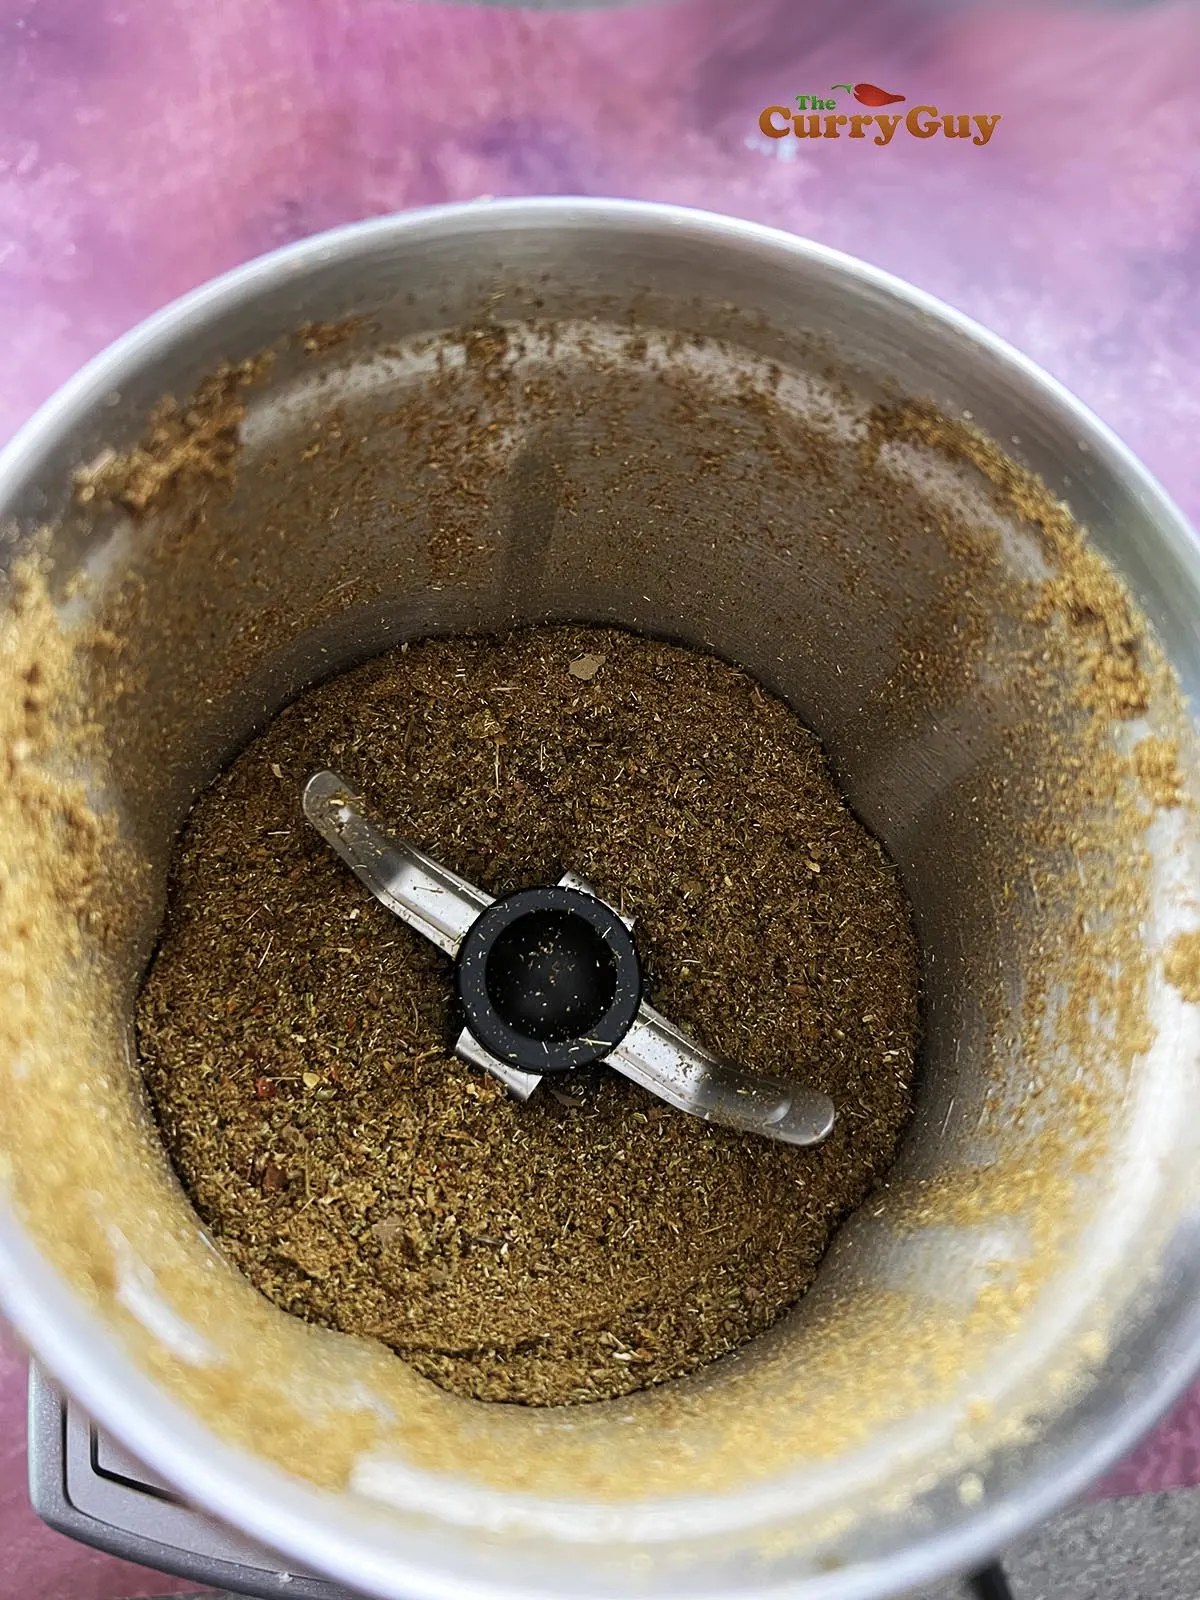 Grinding the spices to a powder.